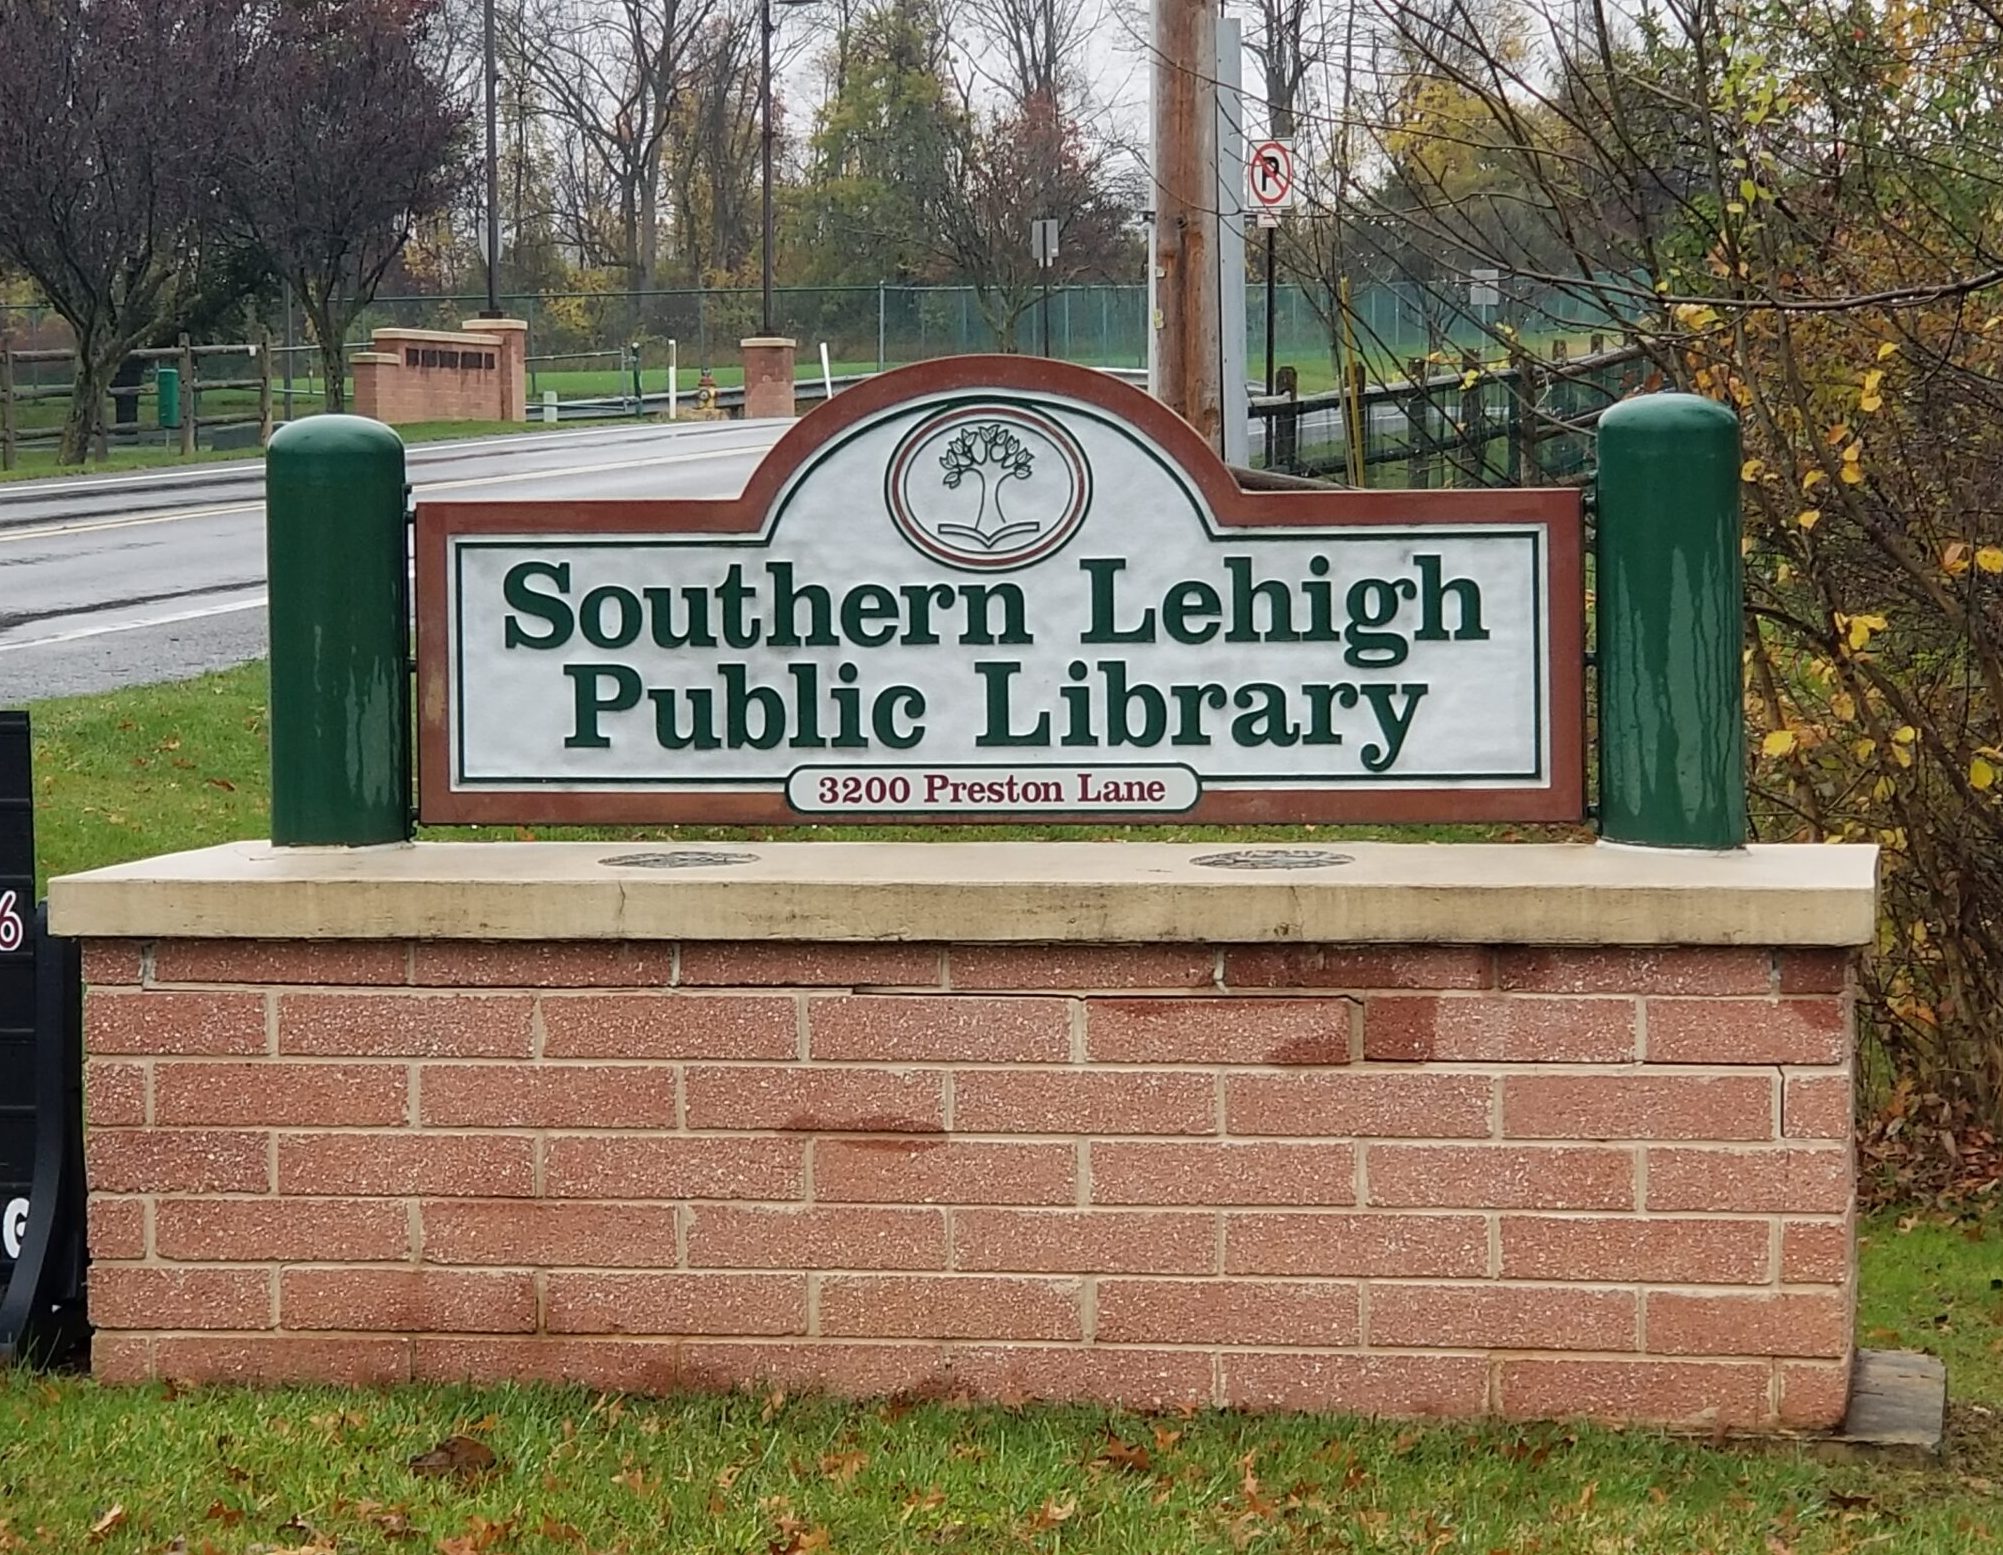 Southern Lehigh Public Library